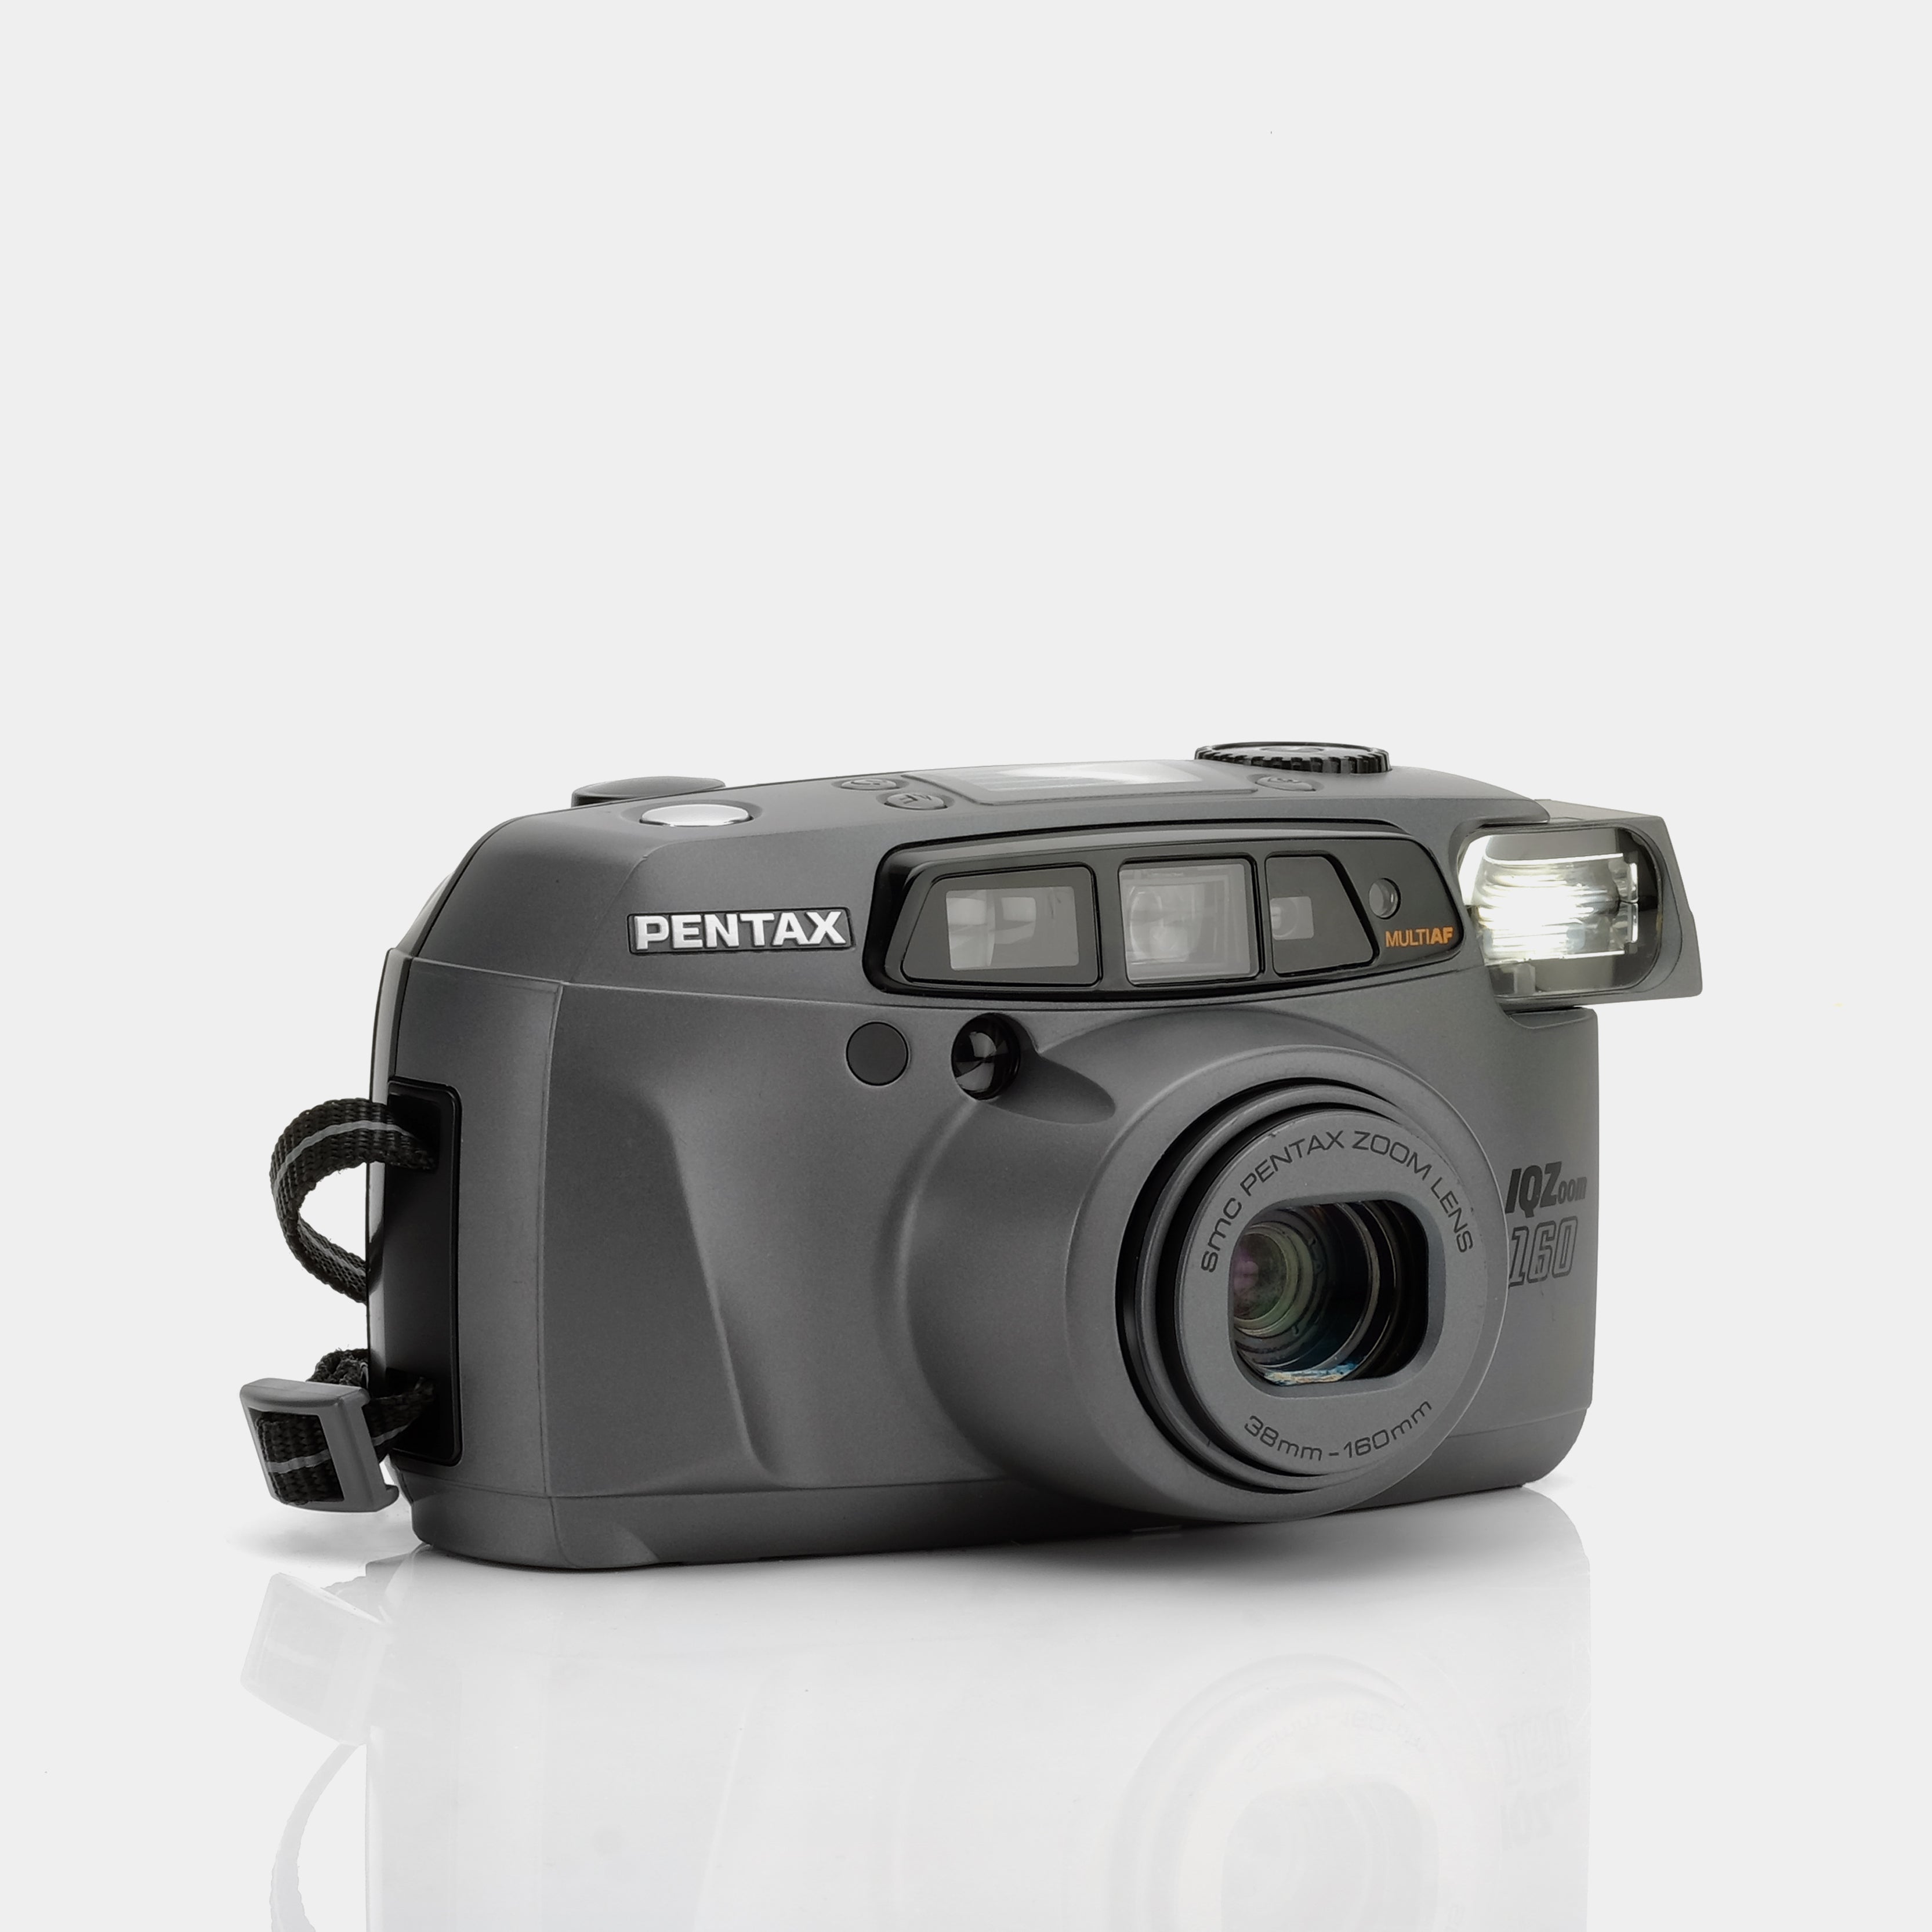 Pentax IQZoom 160 35mm Point and Shoot Film Camera